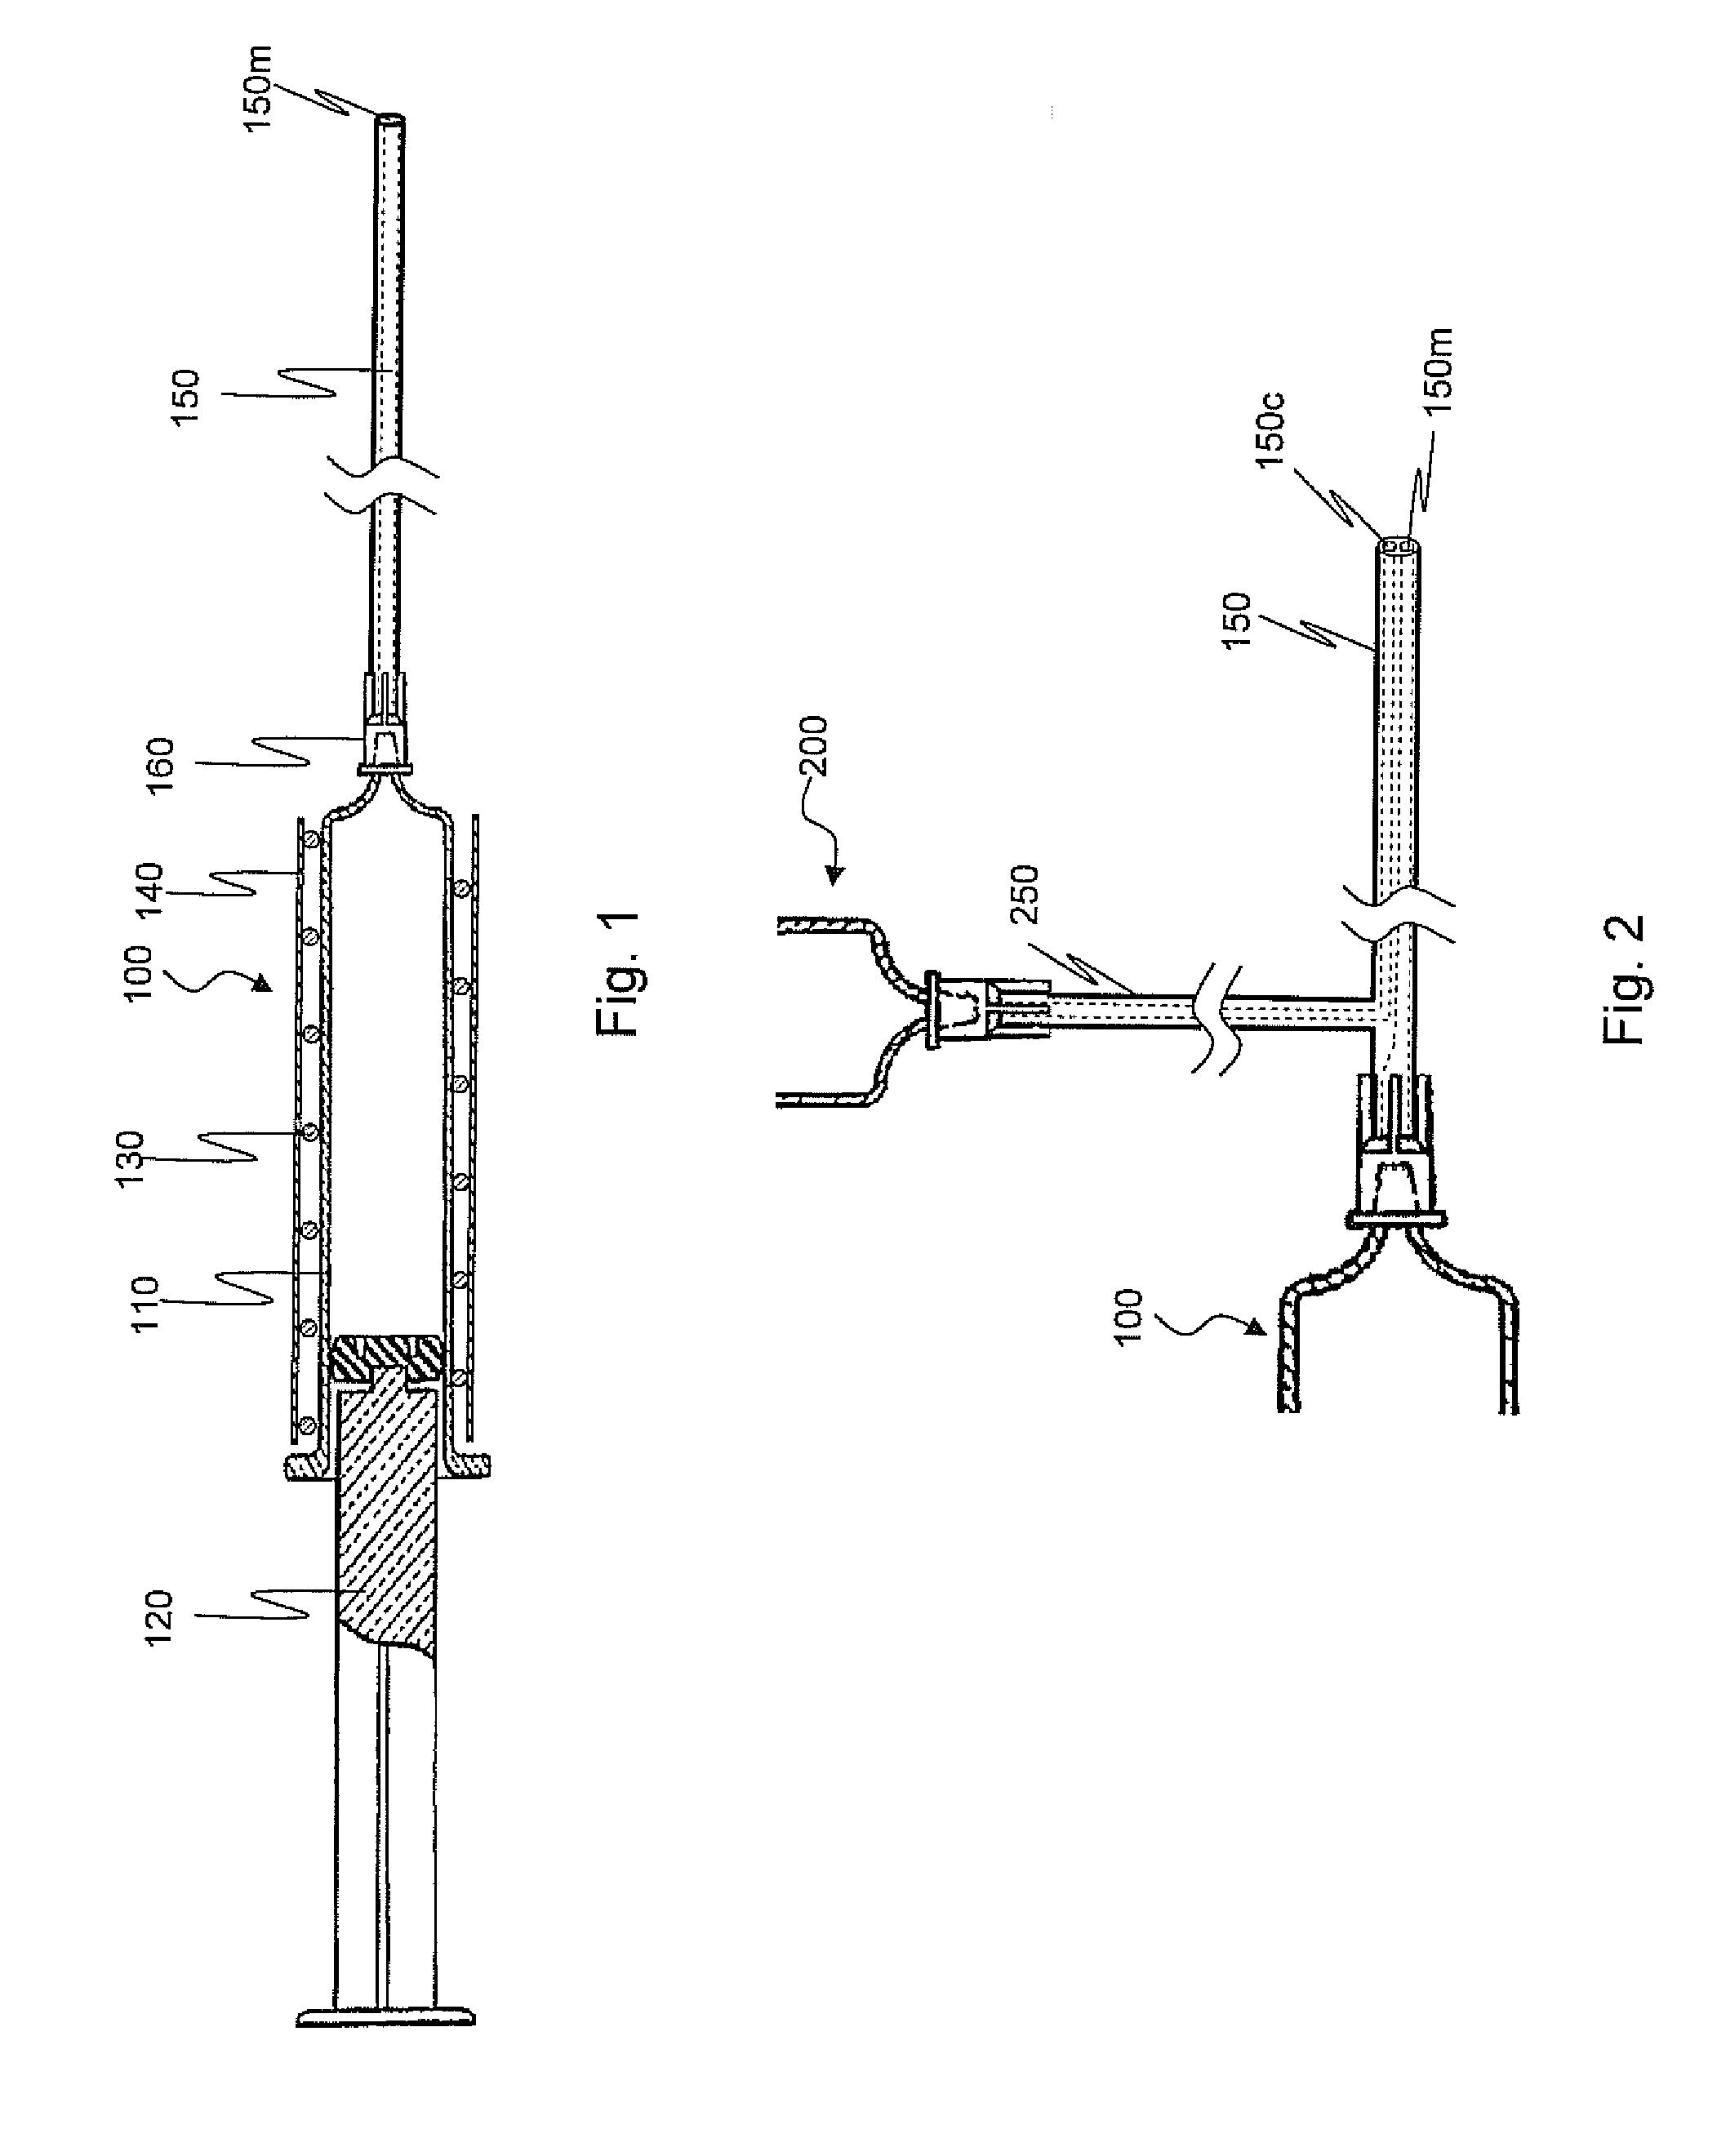 Methods for preventing or inhibiting post-surgical adhesions